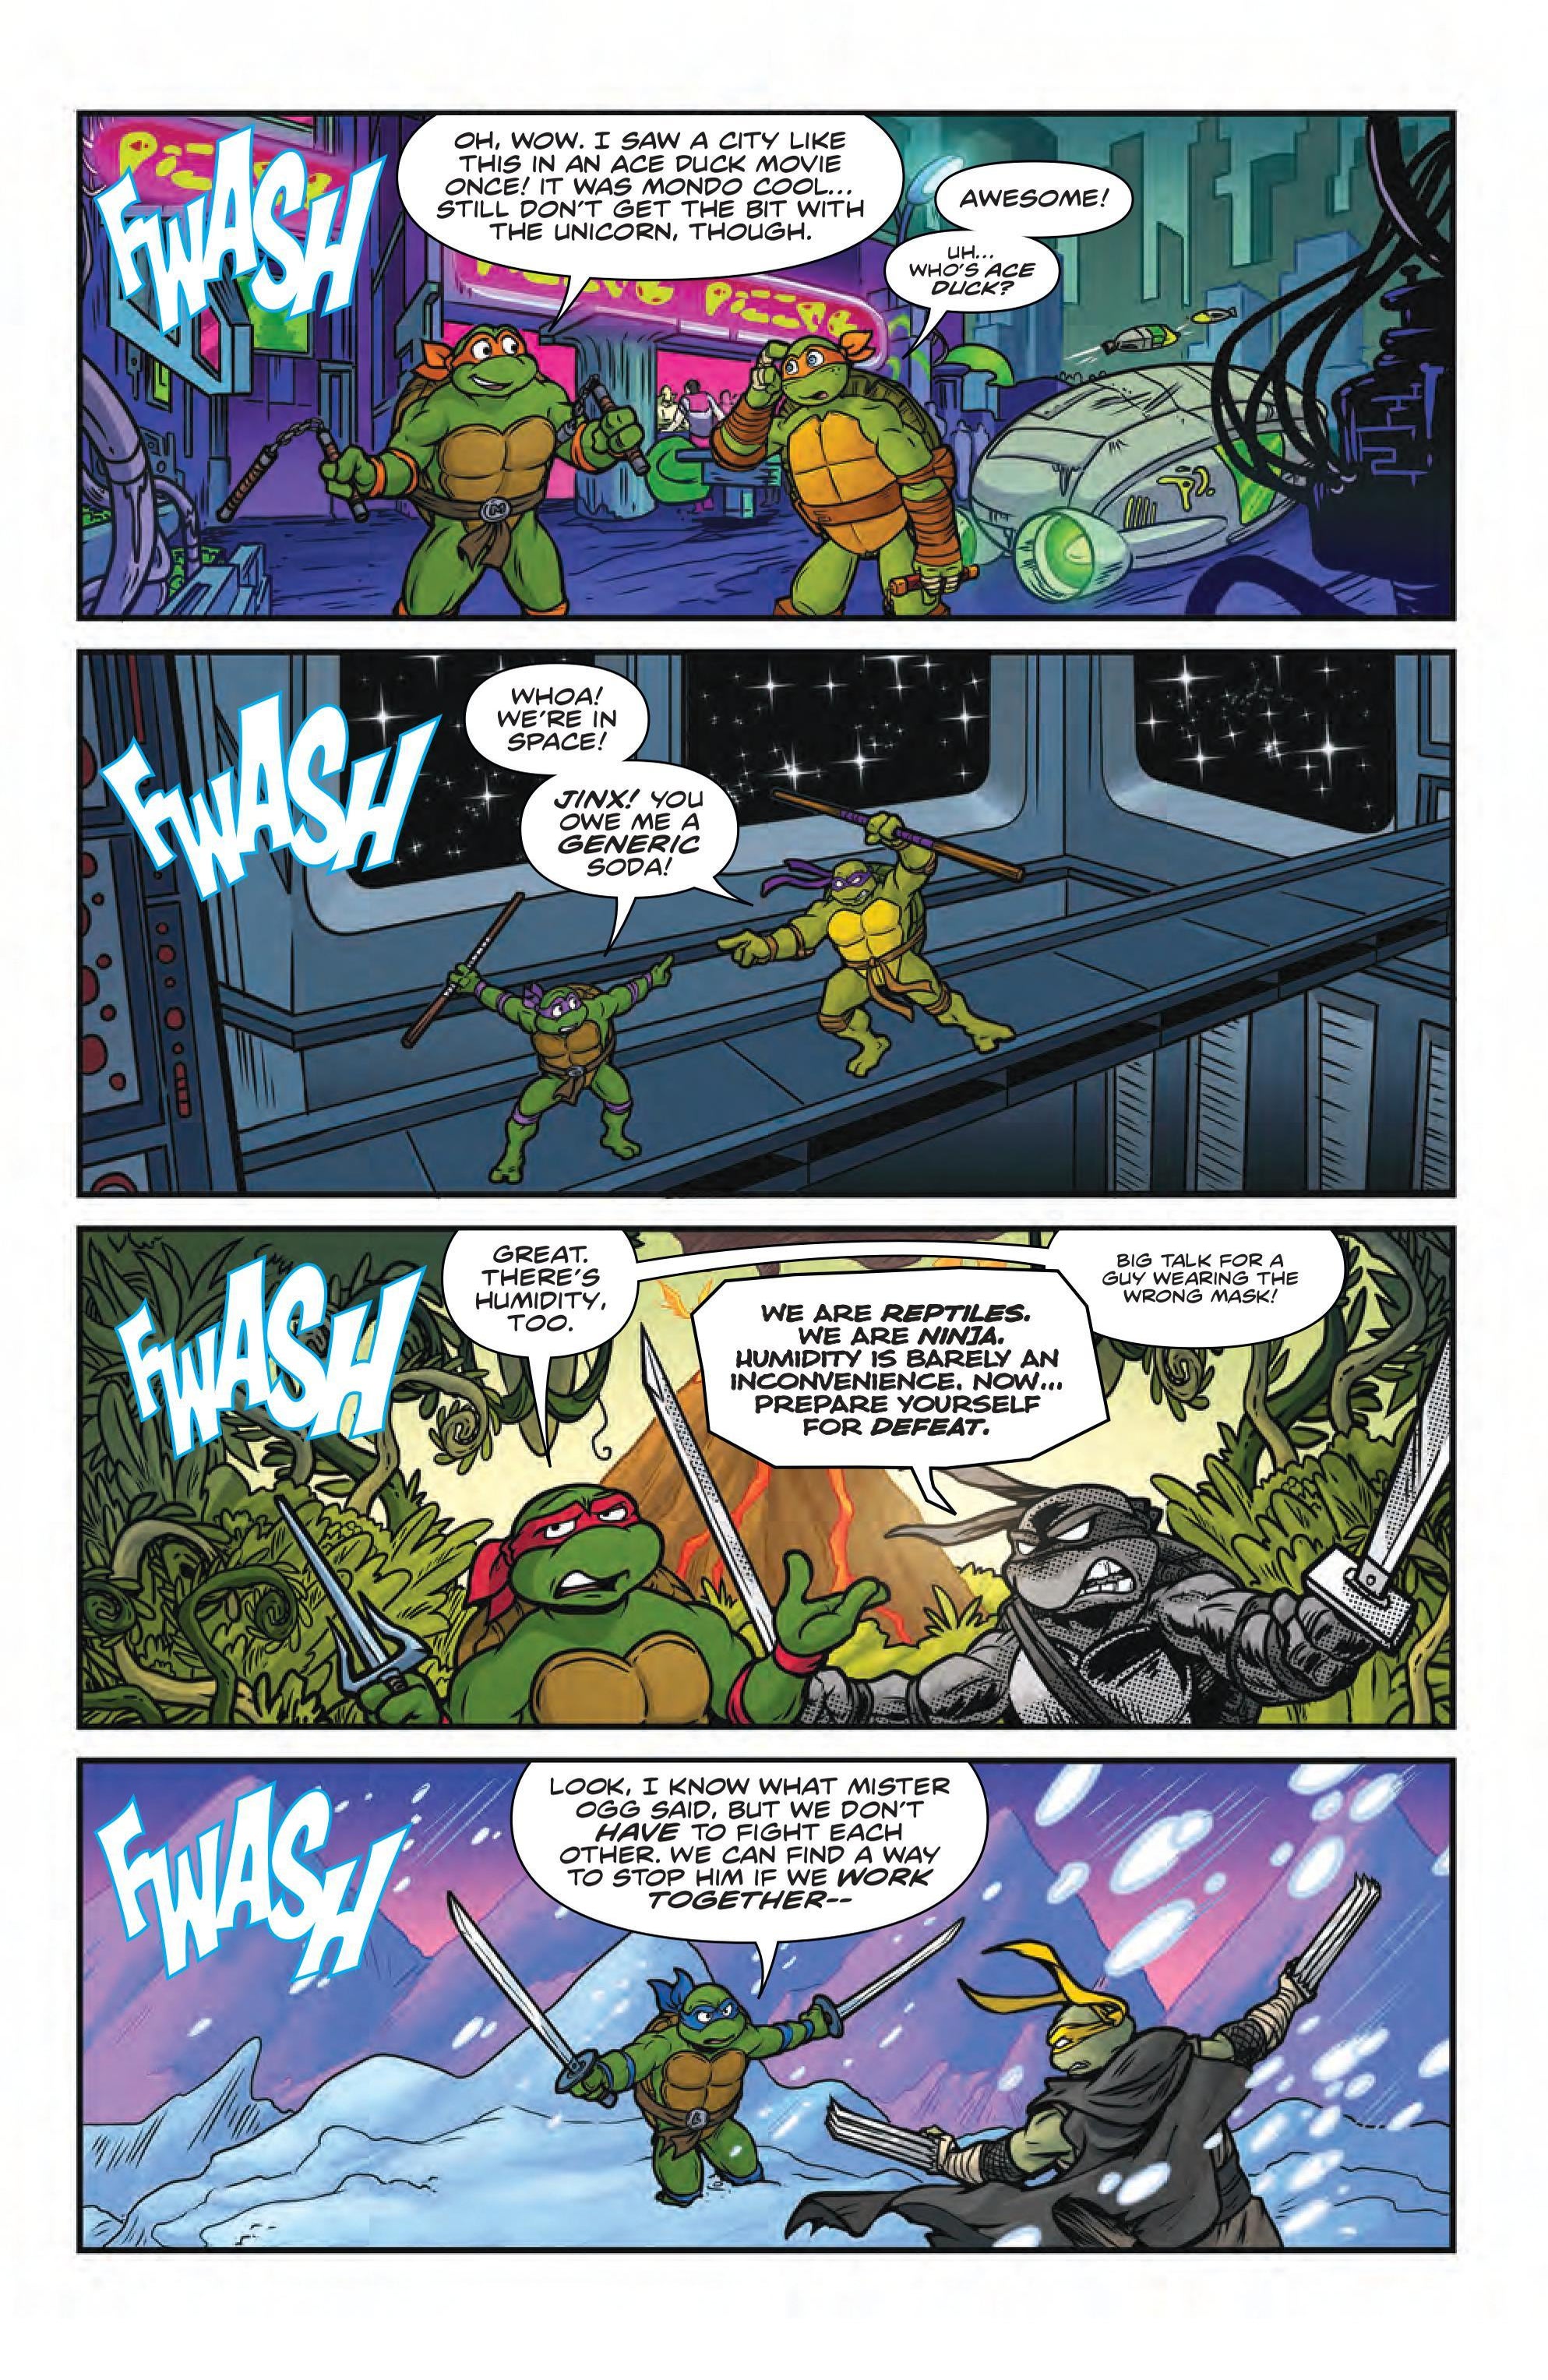 tmnt-sma-cont-13-lo-images-8.jpg